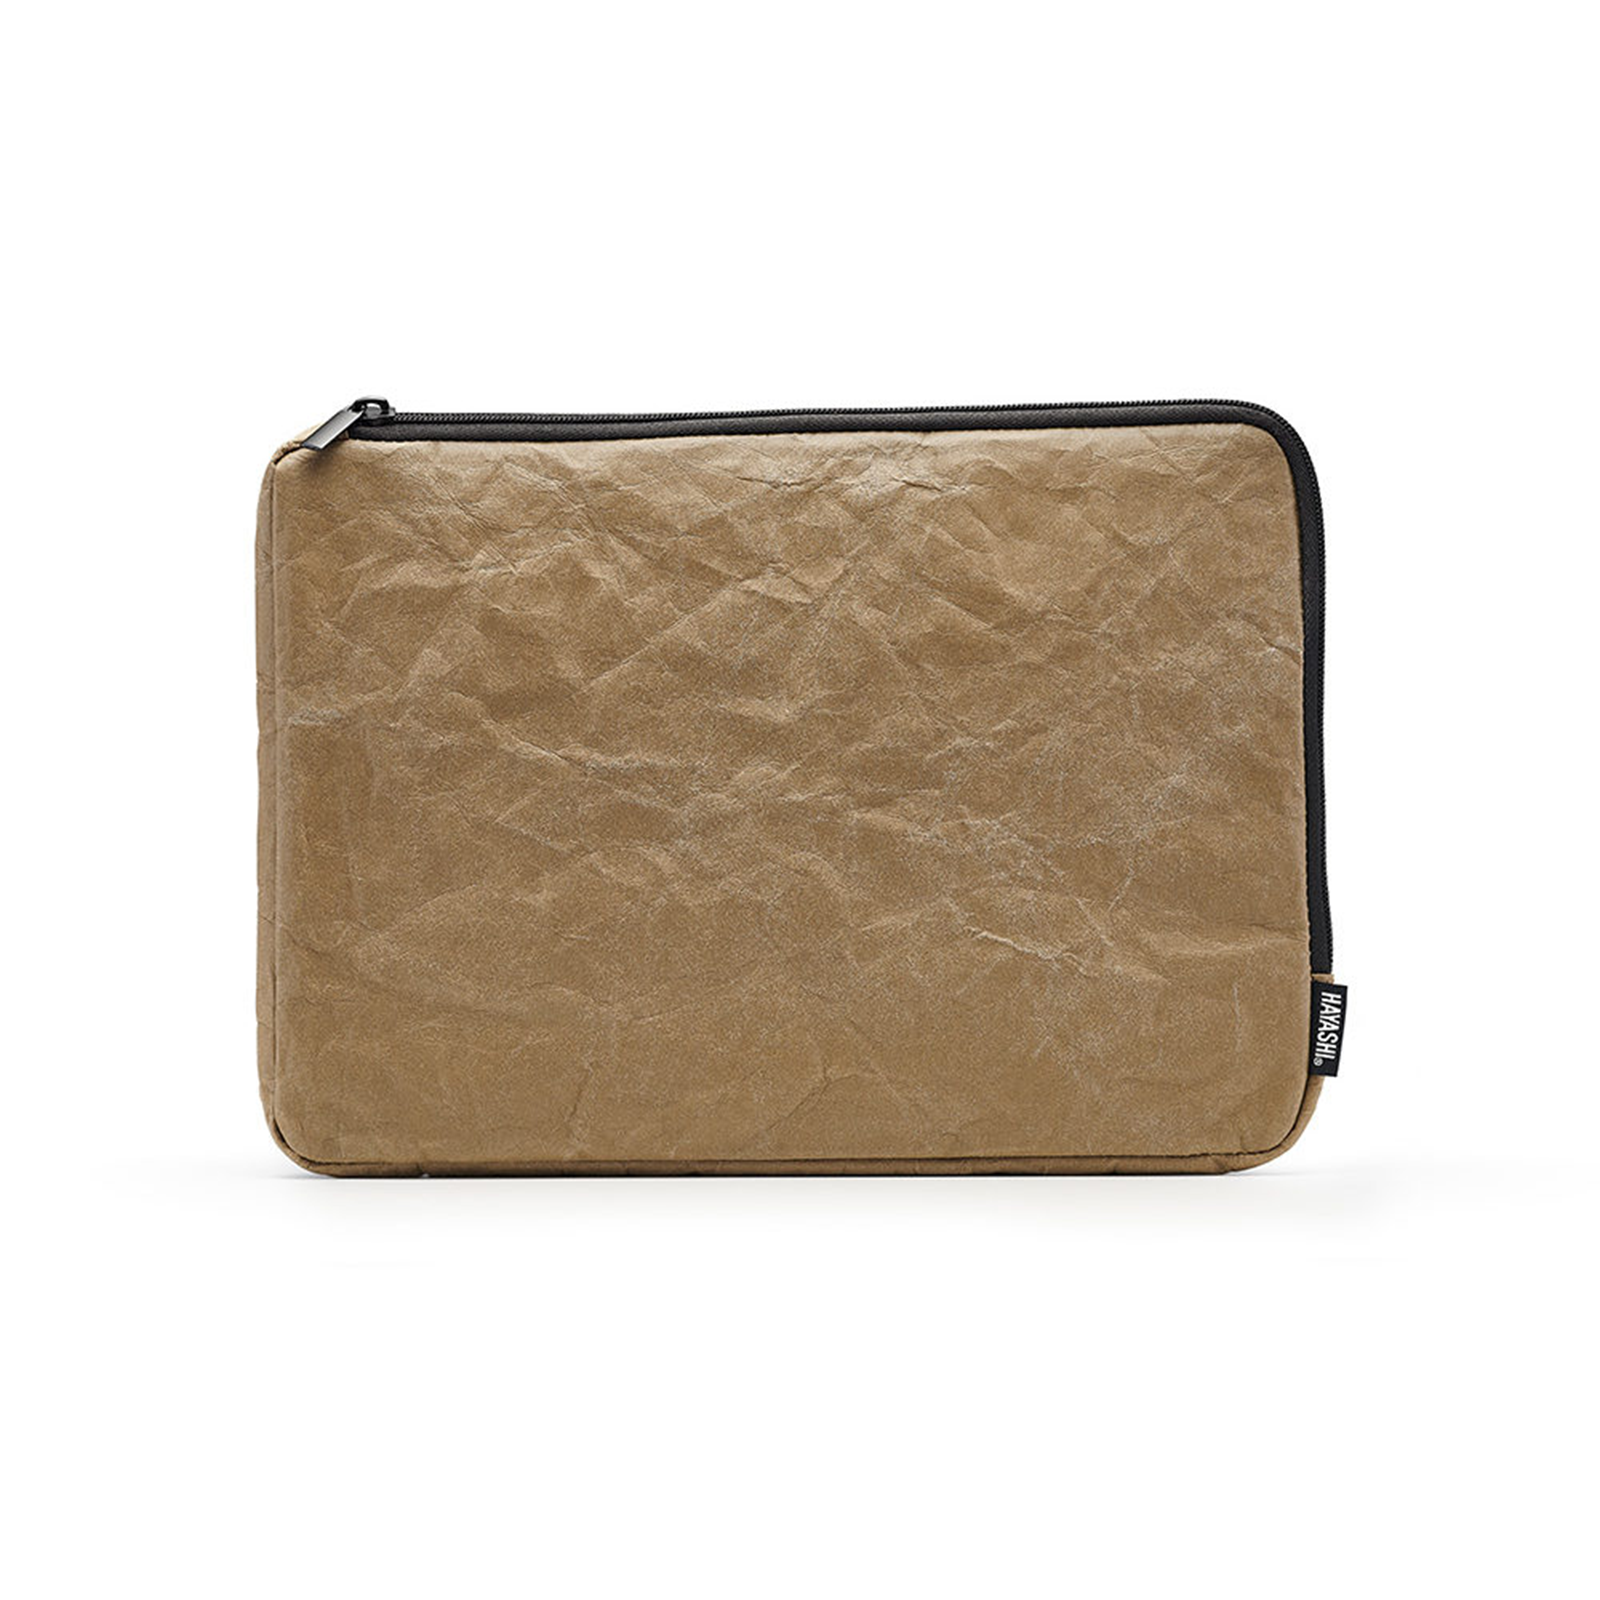 Vegan Paper Leather Laptop Sleeves in Tan Colour